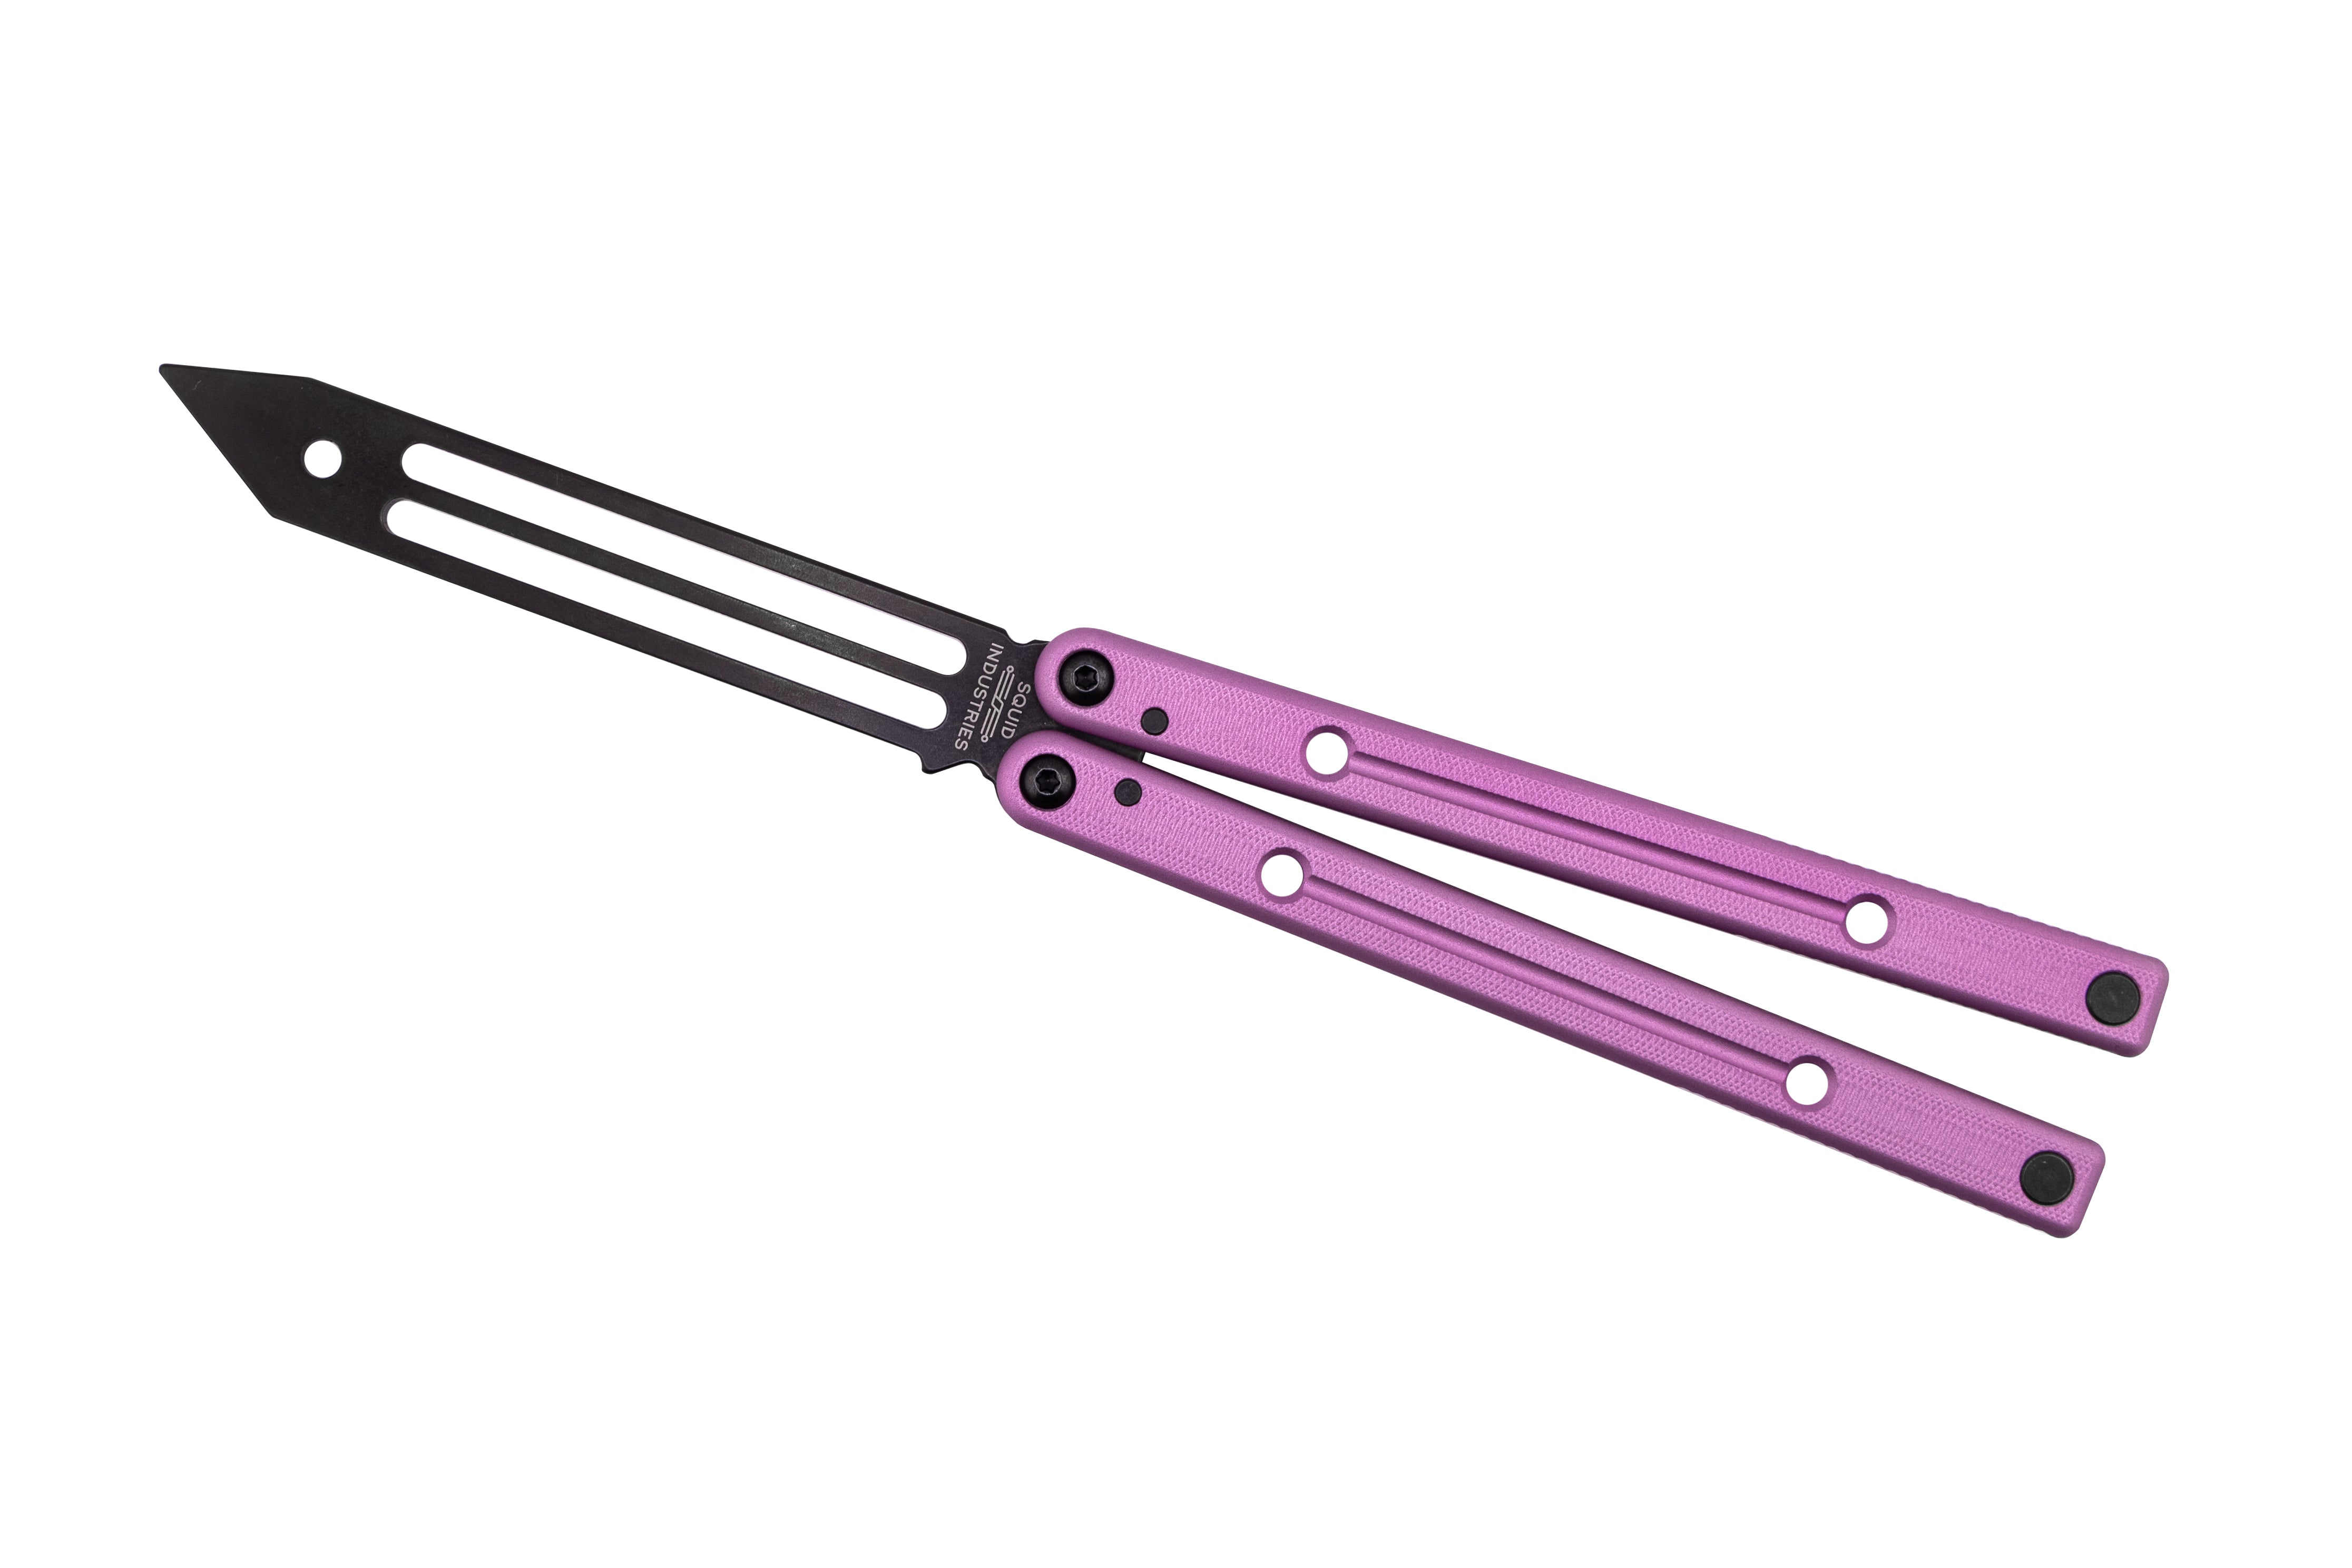 Squidtrainer V4 Balisong Butterfly Knife Trainer | Squid Industries